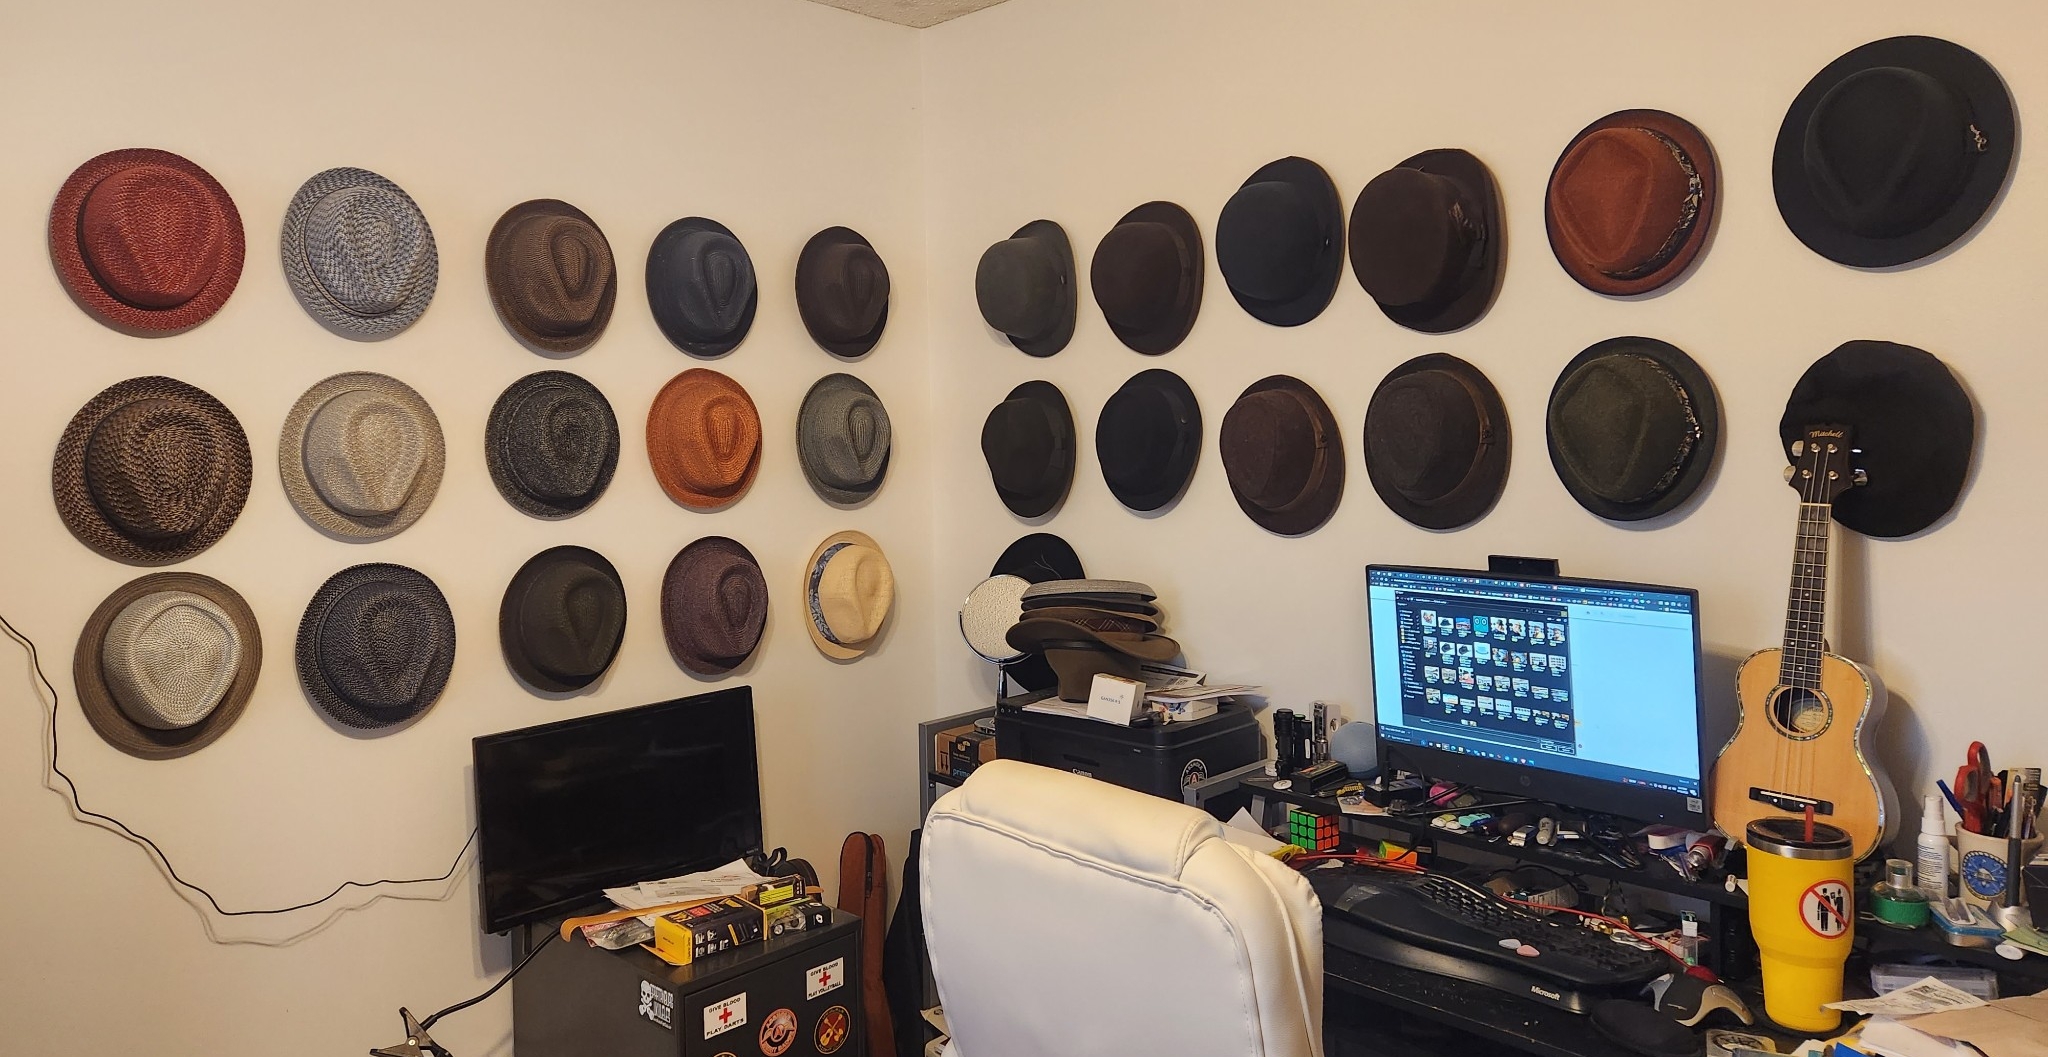 Hats on Wall 031523 cropped.jpg